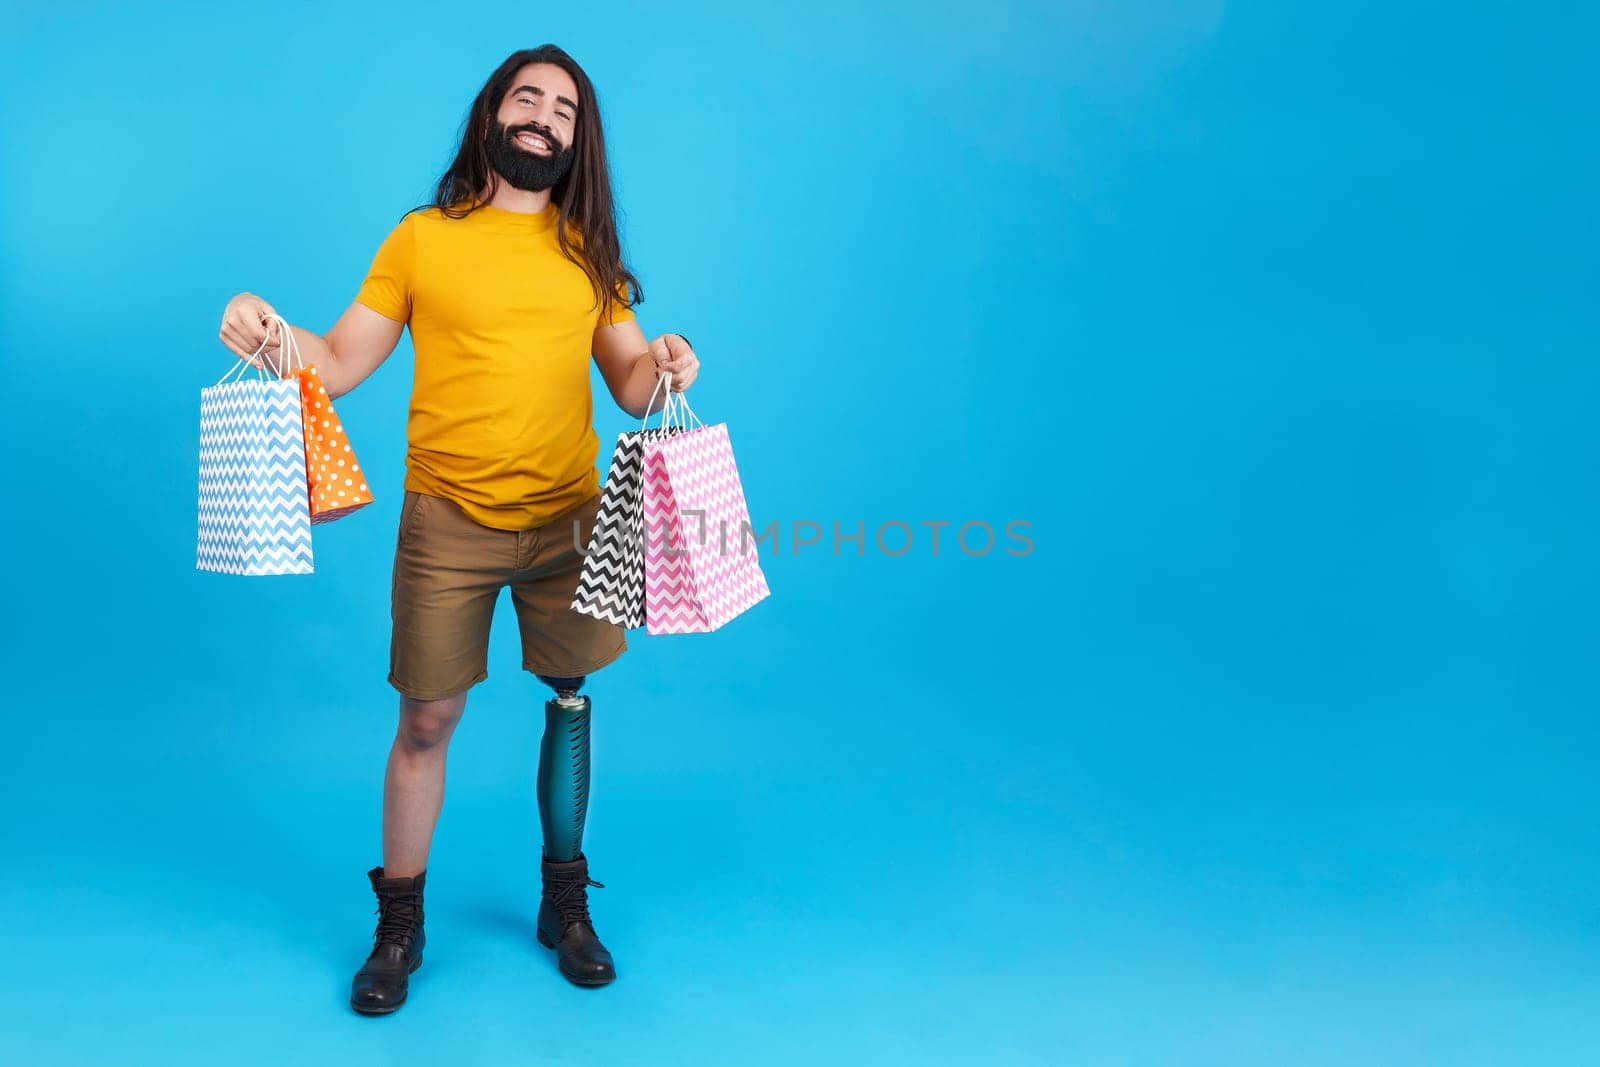 Studio portrait with blue background of a happy man with prosthetic leg holing many shopping bags